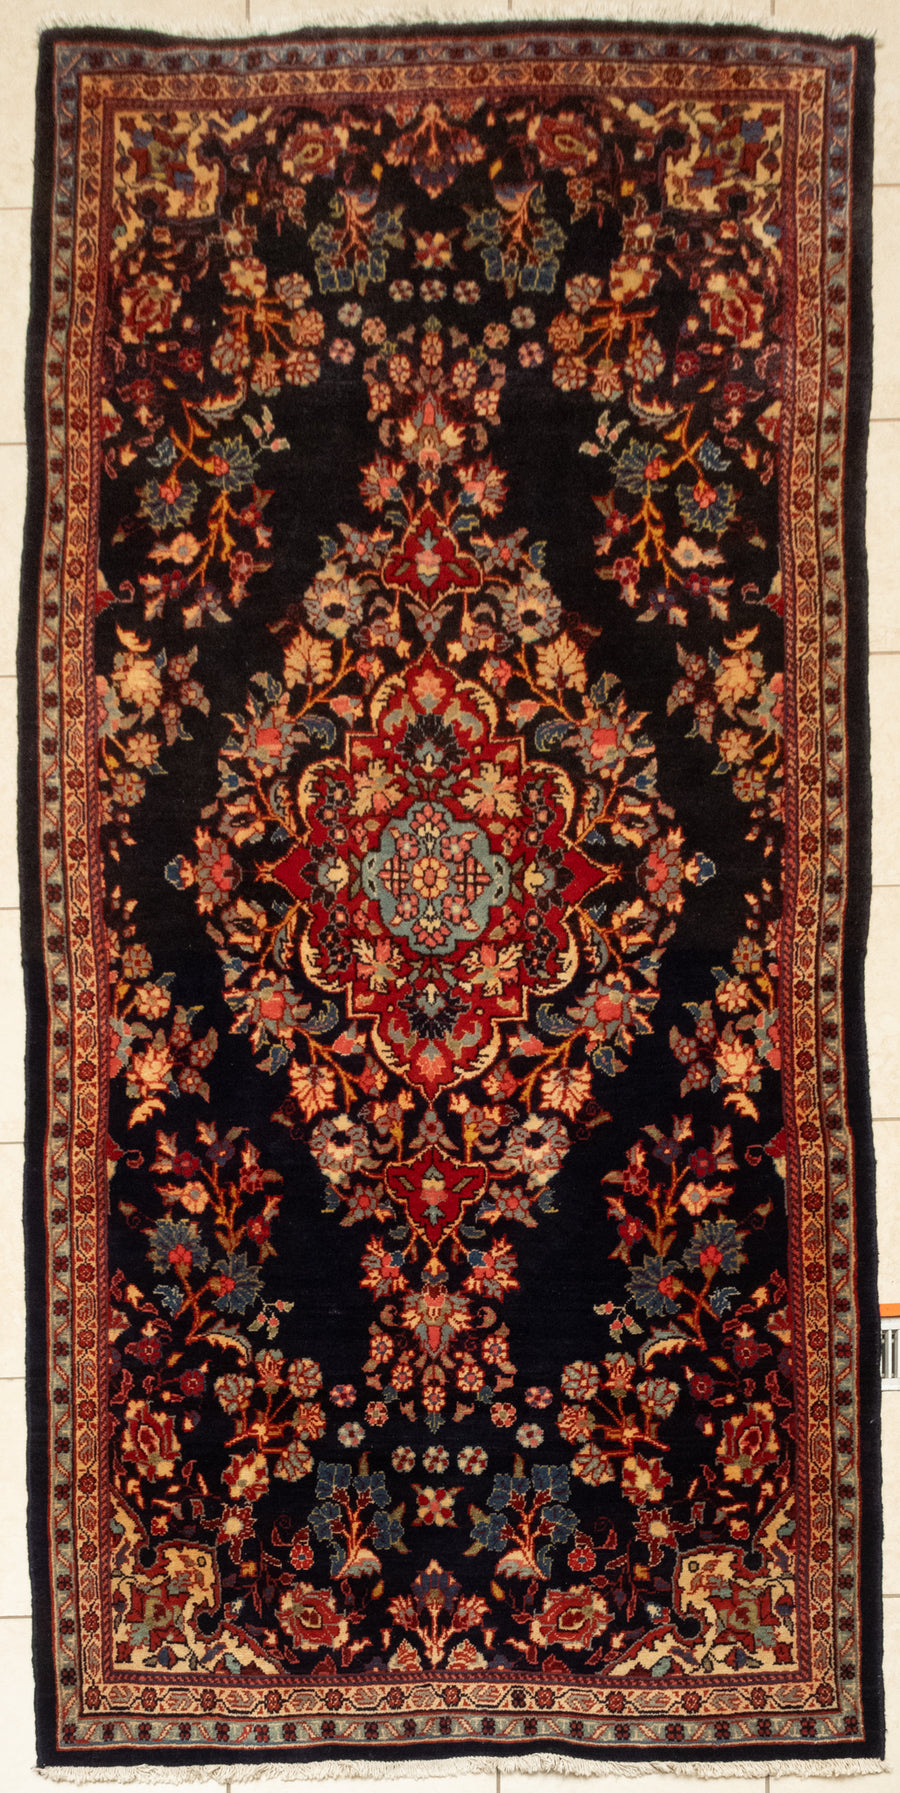 Hand-Knotted Wool Rug 11'x4'9"